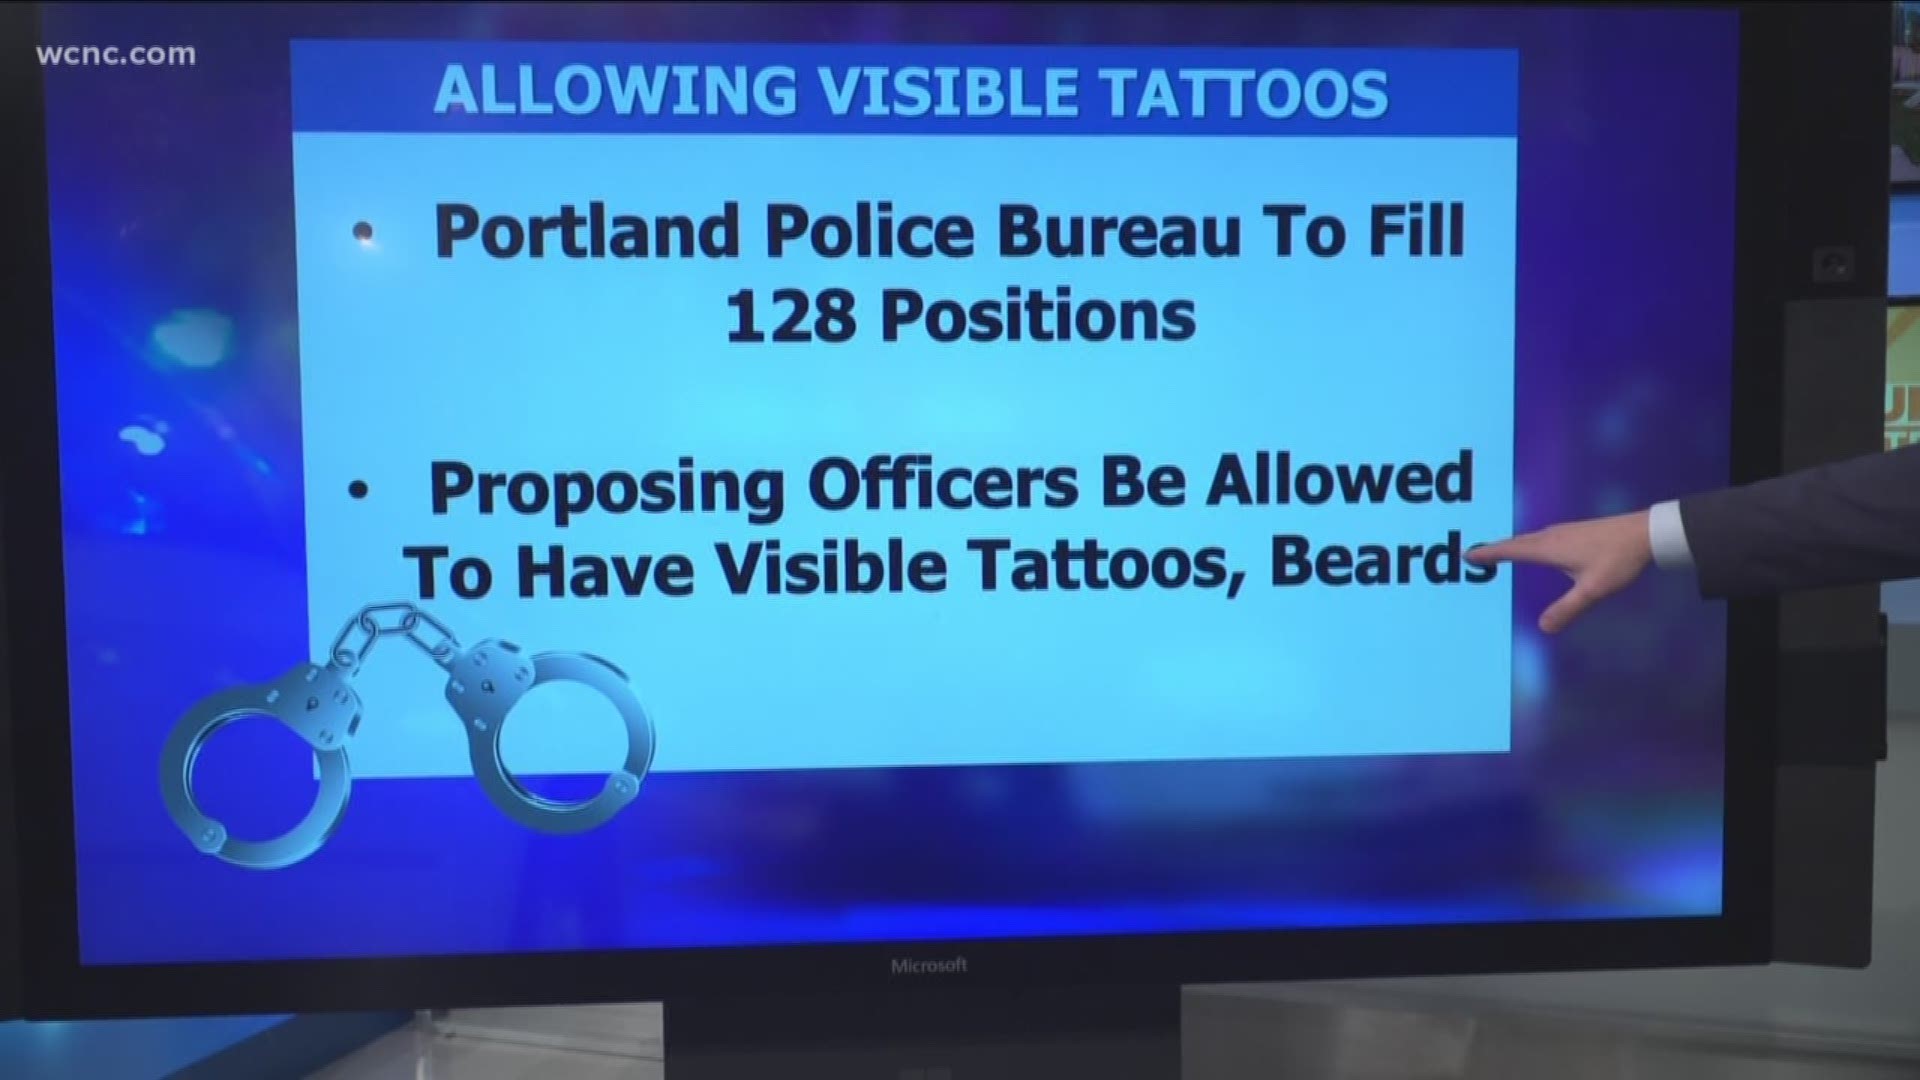 For years, police departments have struggled to fill open positions. So the Portland Police Bureau is changing its rules on visible face and neck tattoos. Is this the right decision?